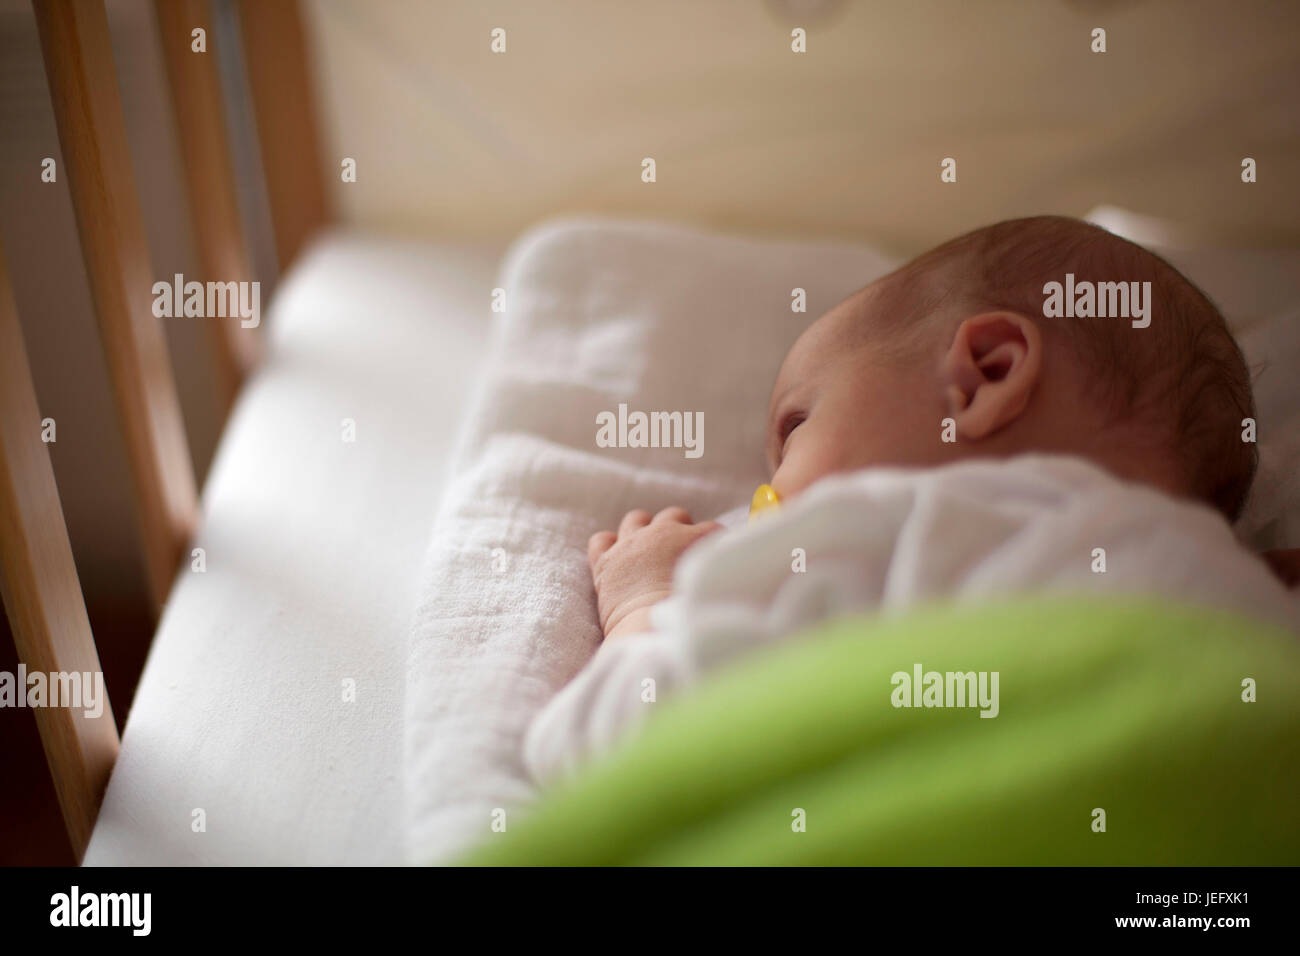 Newborn baby in crib with nipple in mouth Stock Photo